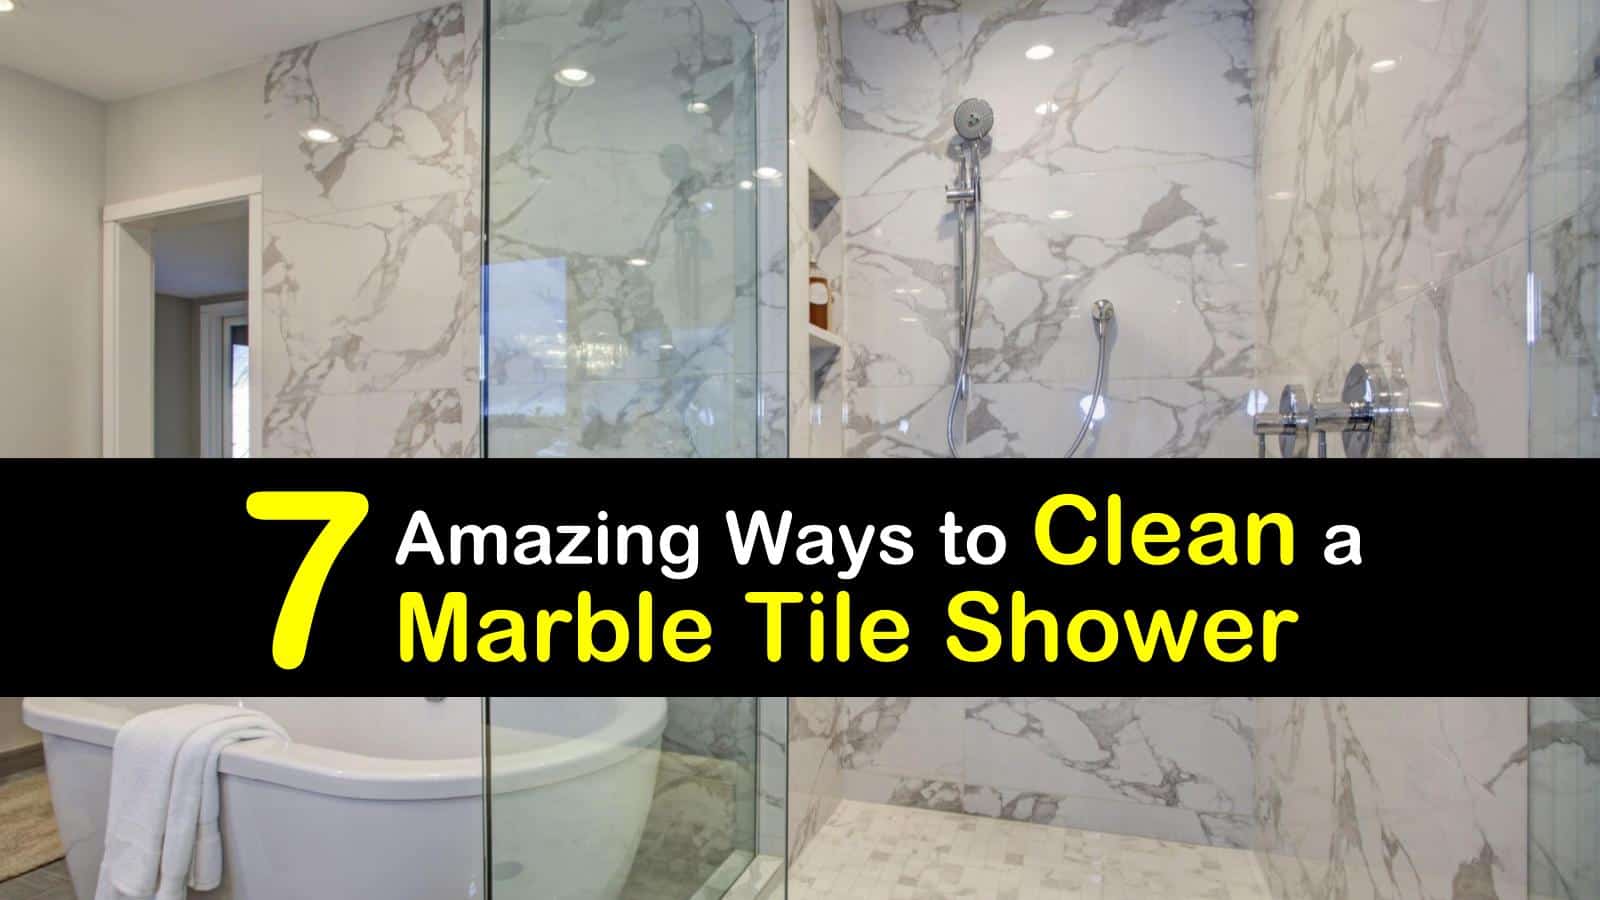 How To Clean A Marble Tile Shower